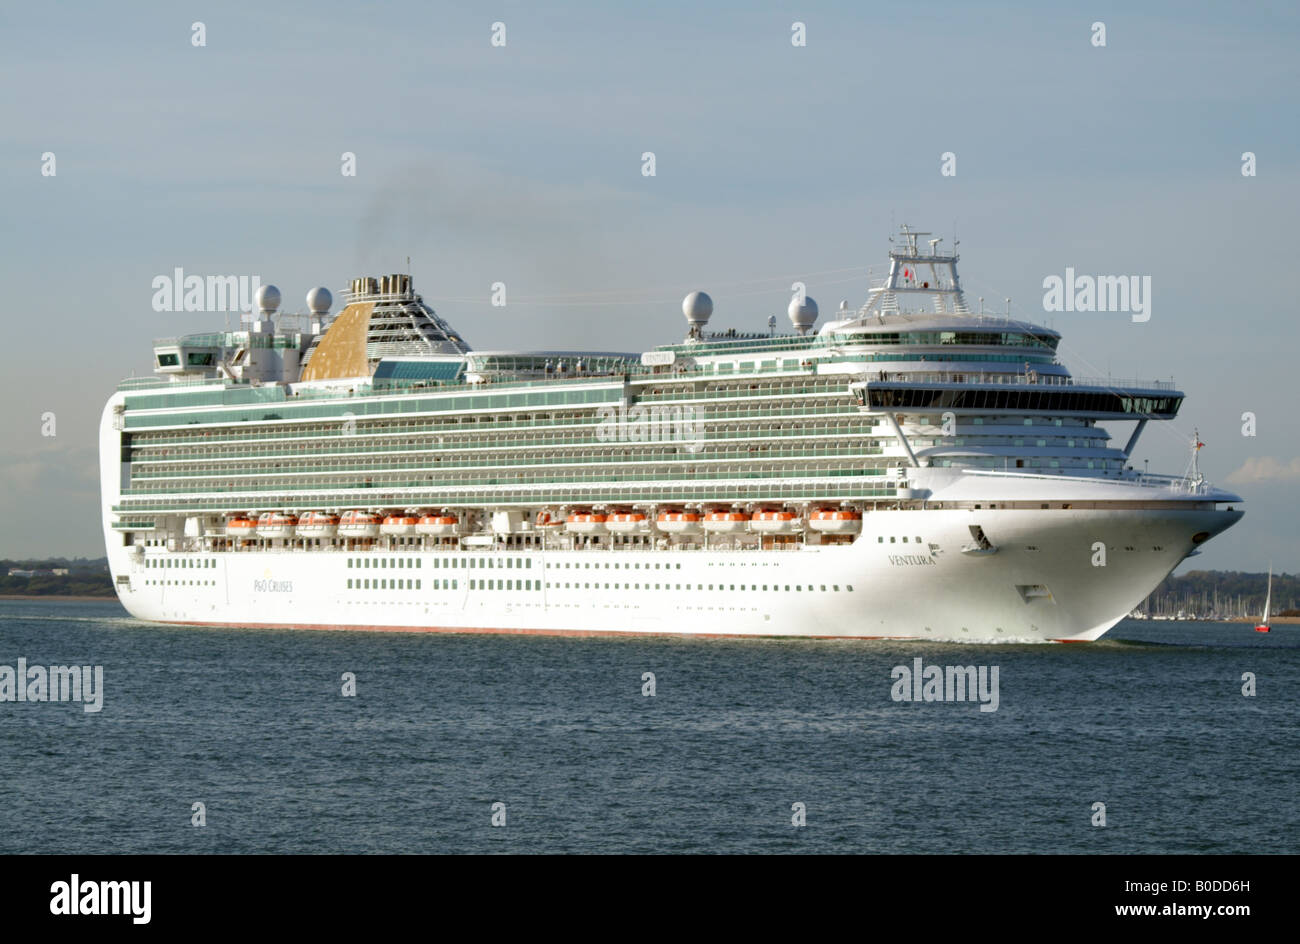 P O cruiseliner ship Ventura launched in April 2008 Southampton Water England UK Stock Photo